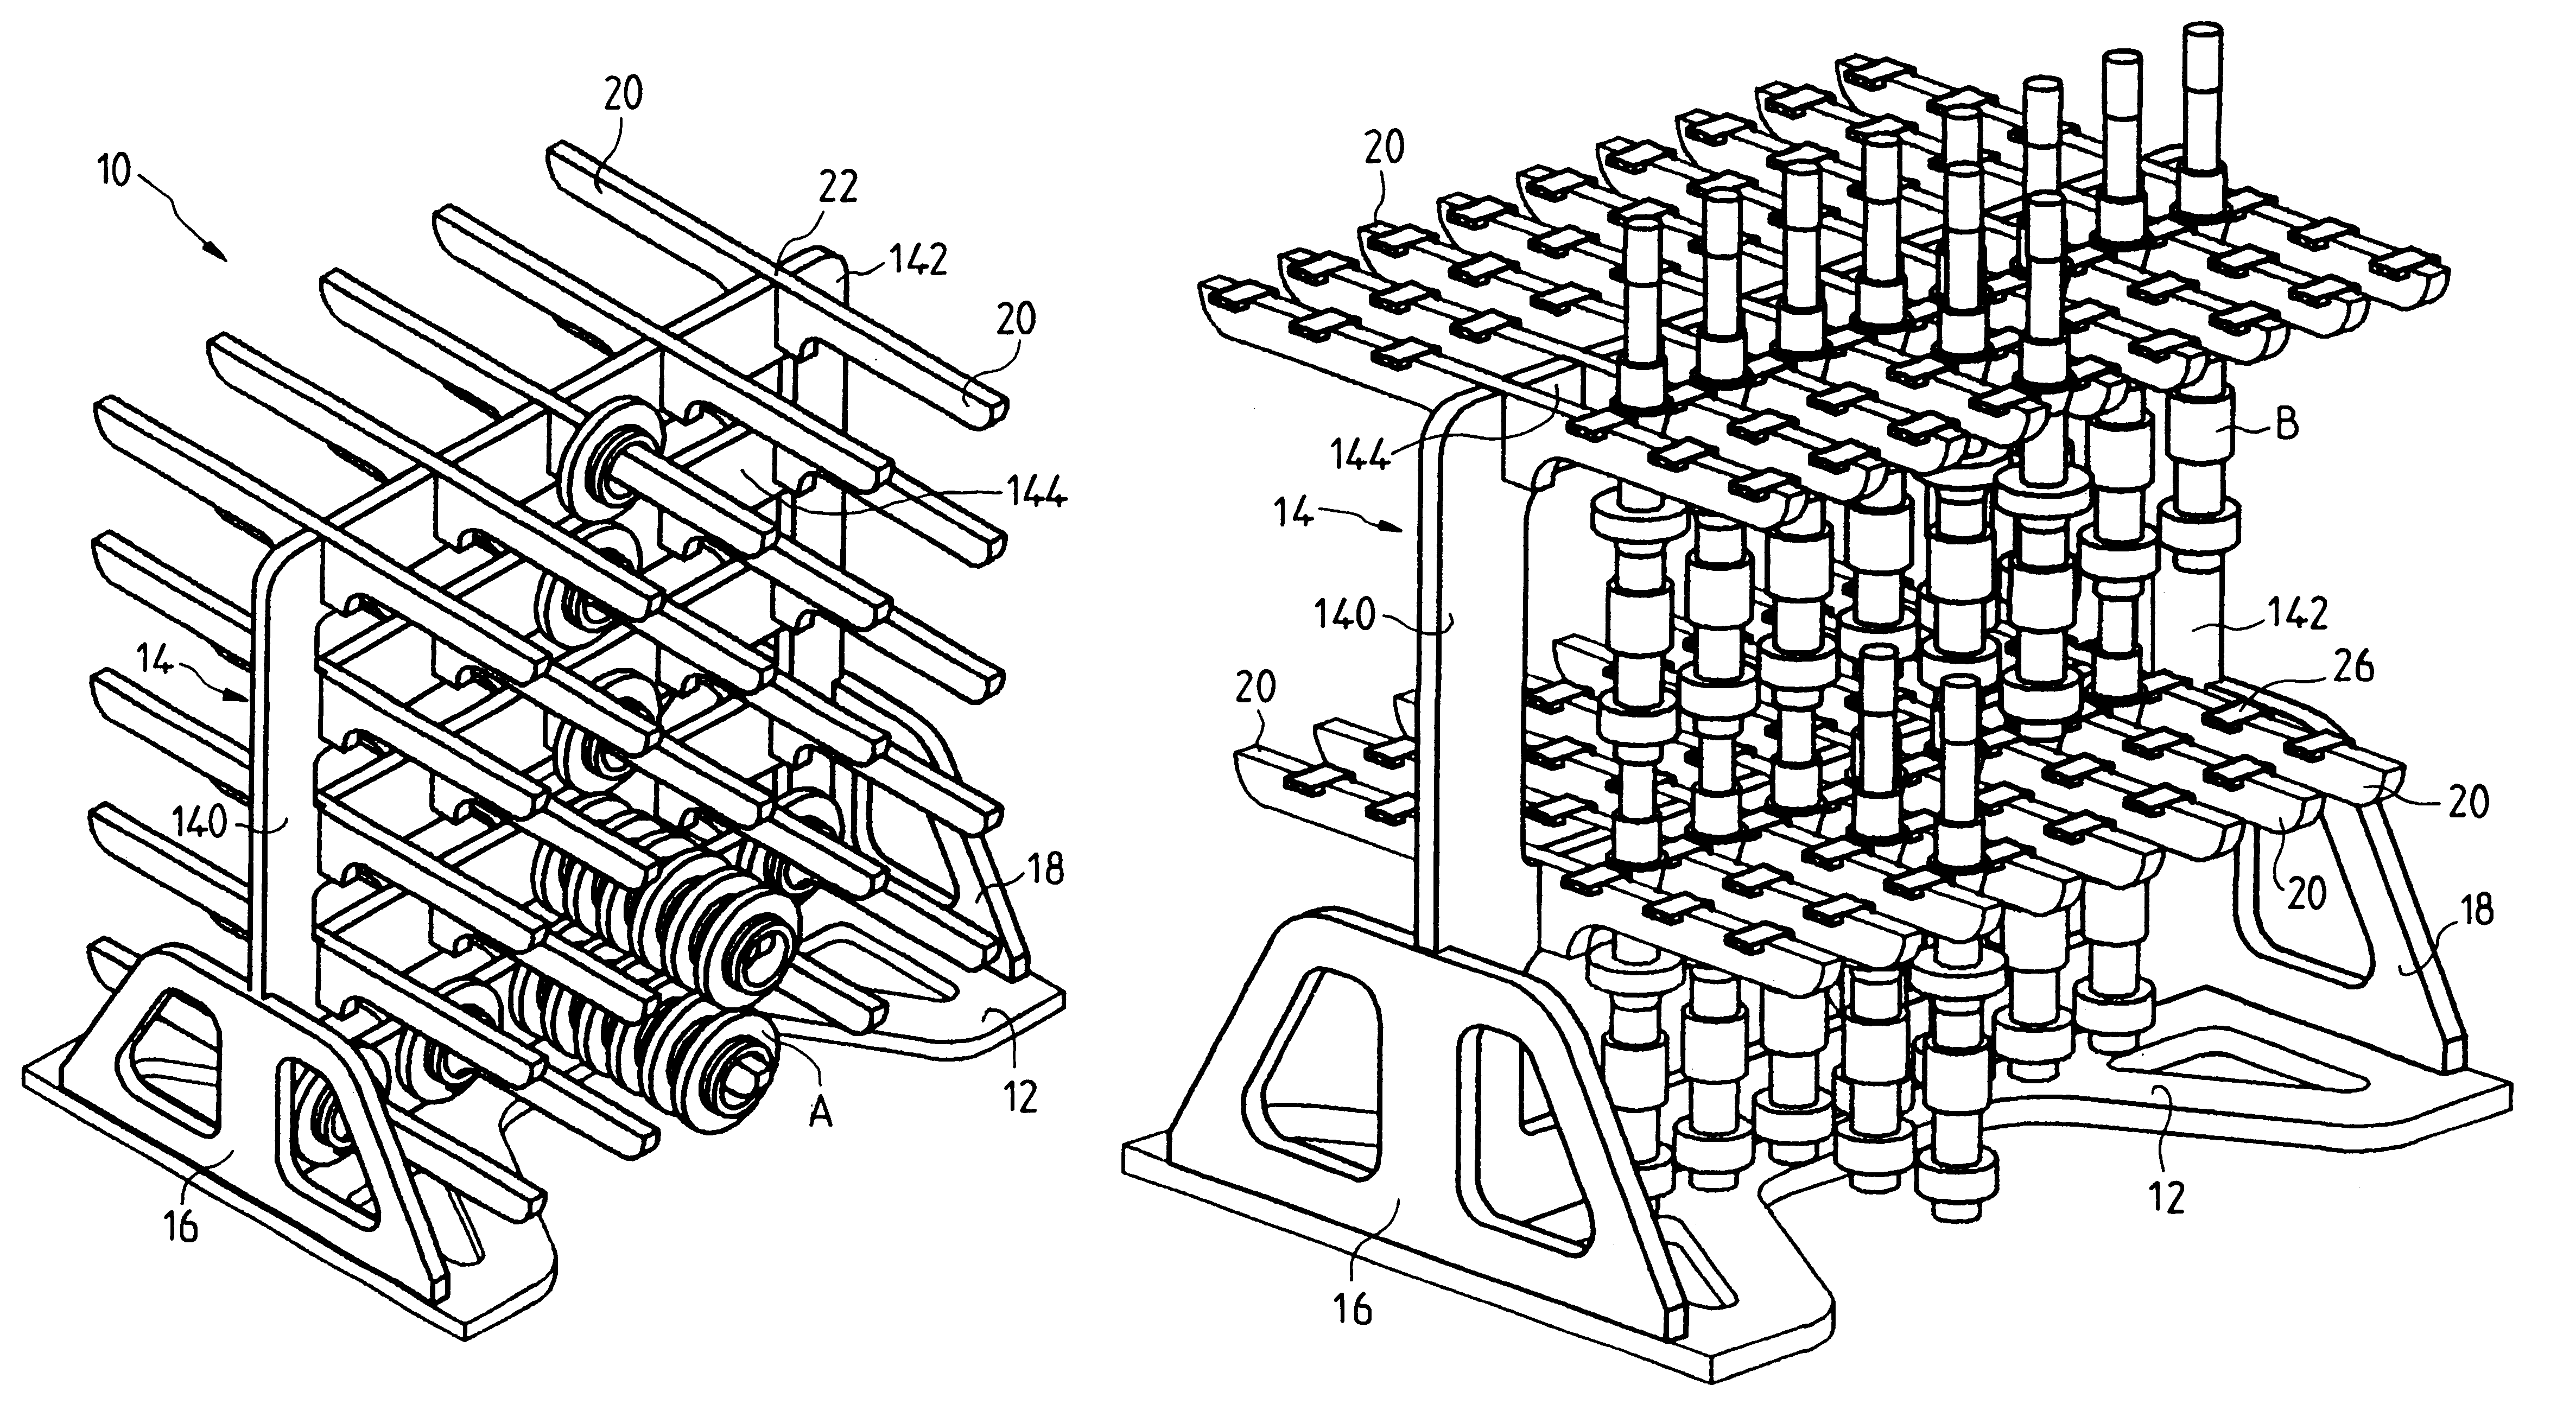 Rack for loading parts for heat treatment